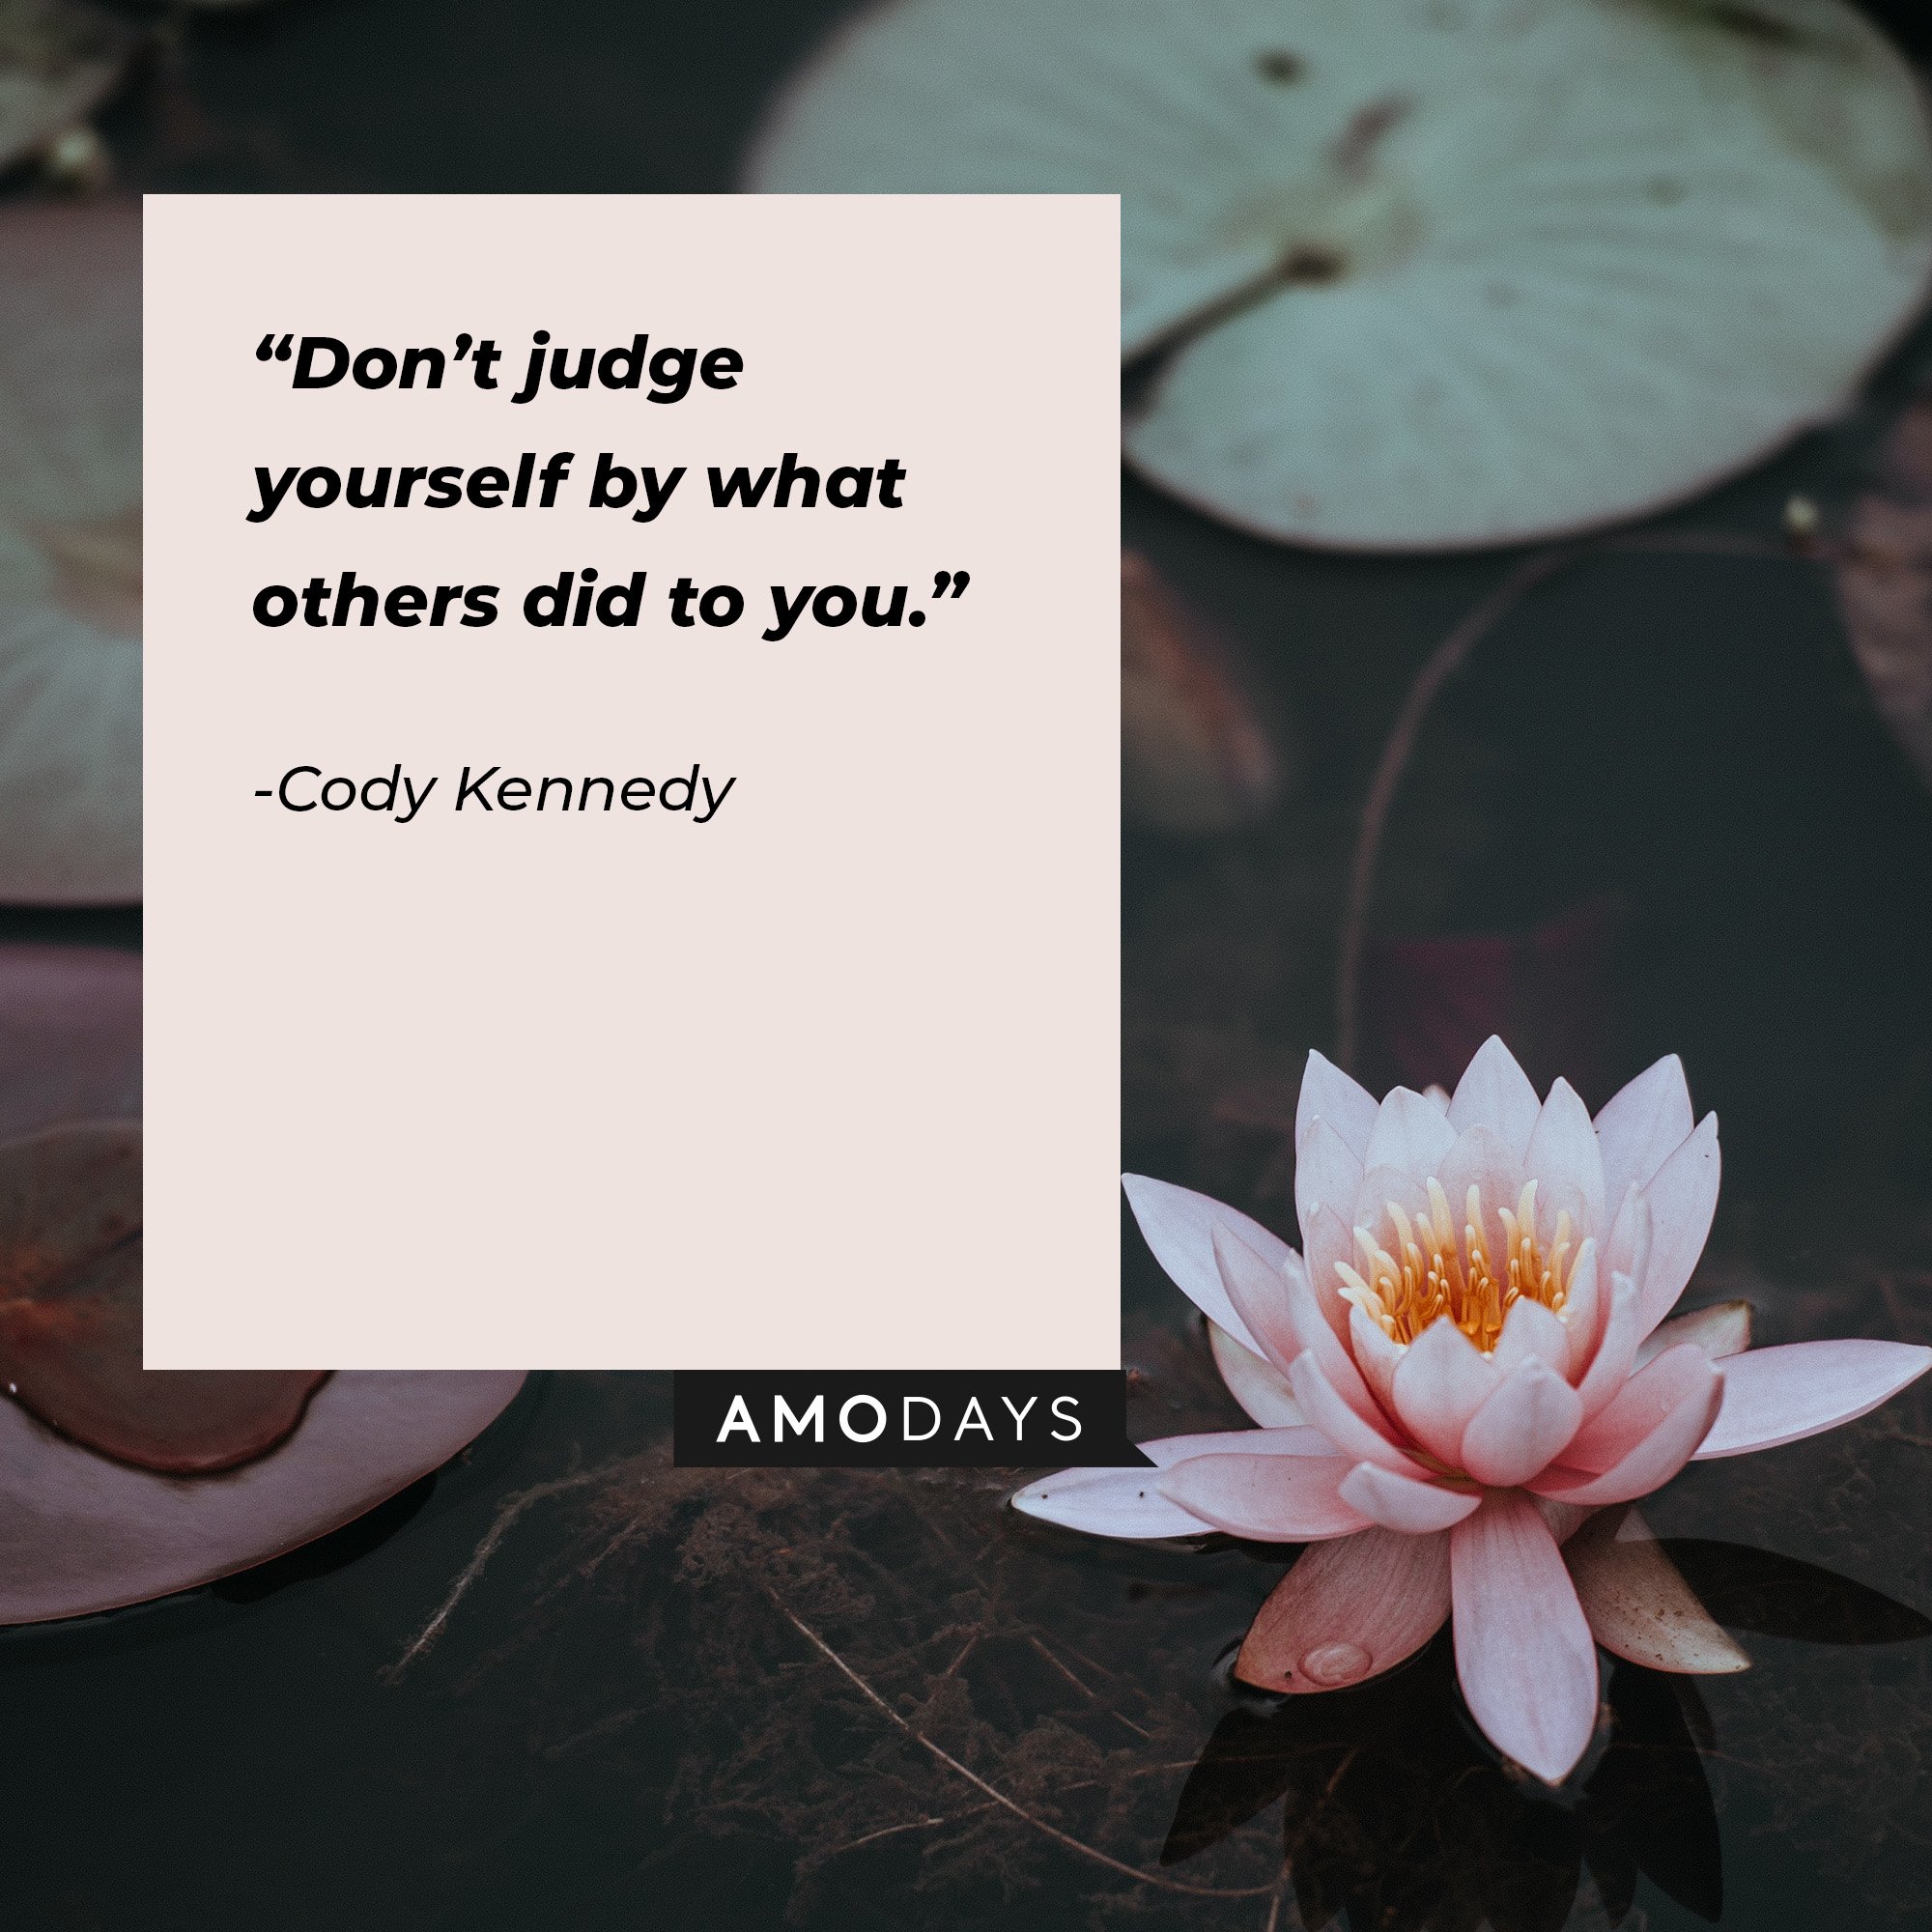  Cody Kennedy’ quote:“Don’t judge yourself by what others did to you.” | Image: AmoDays   